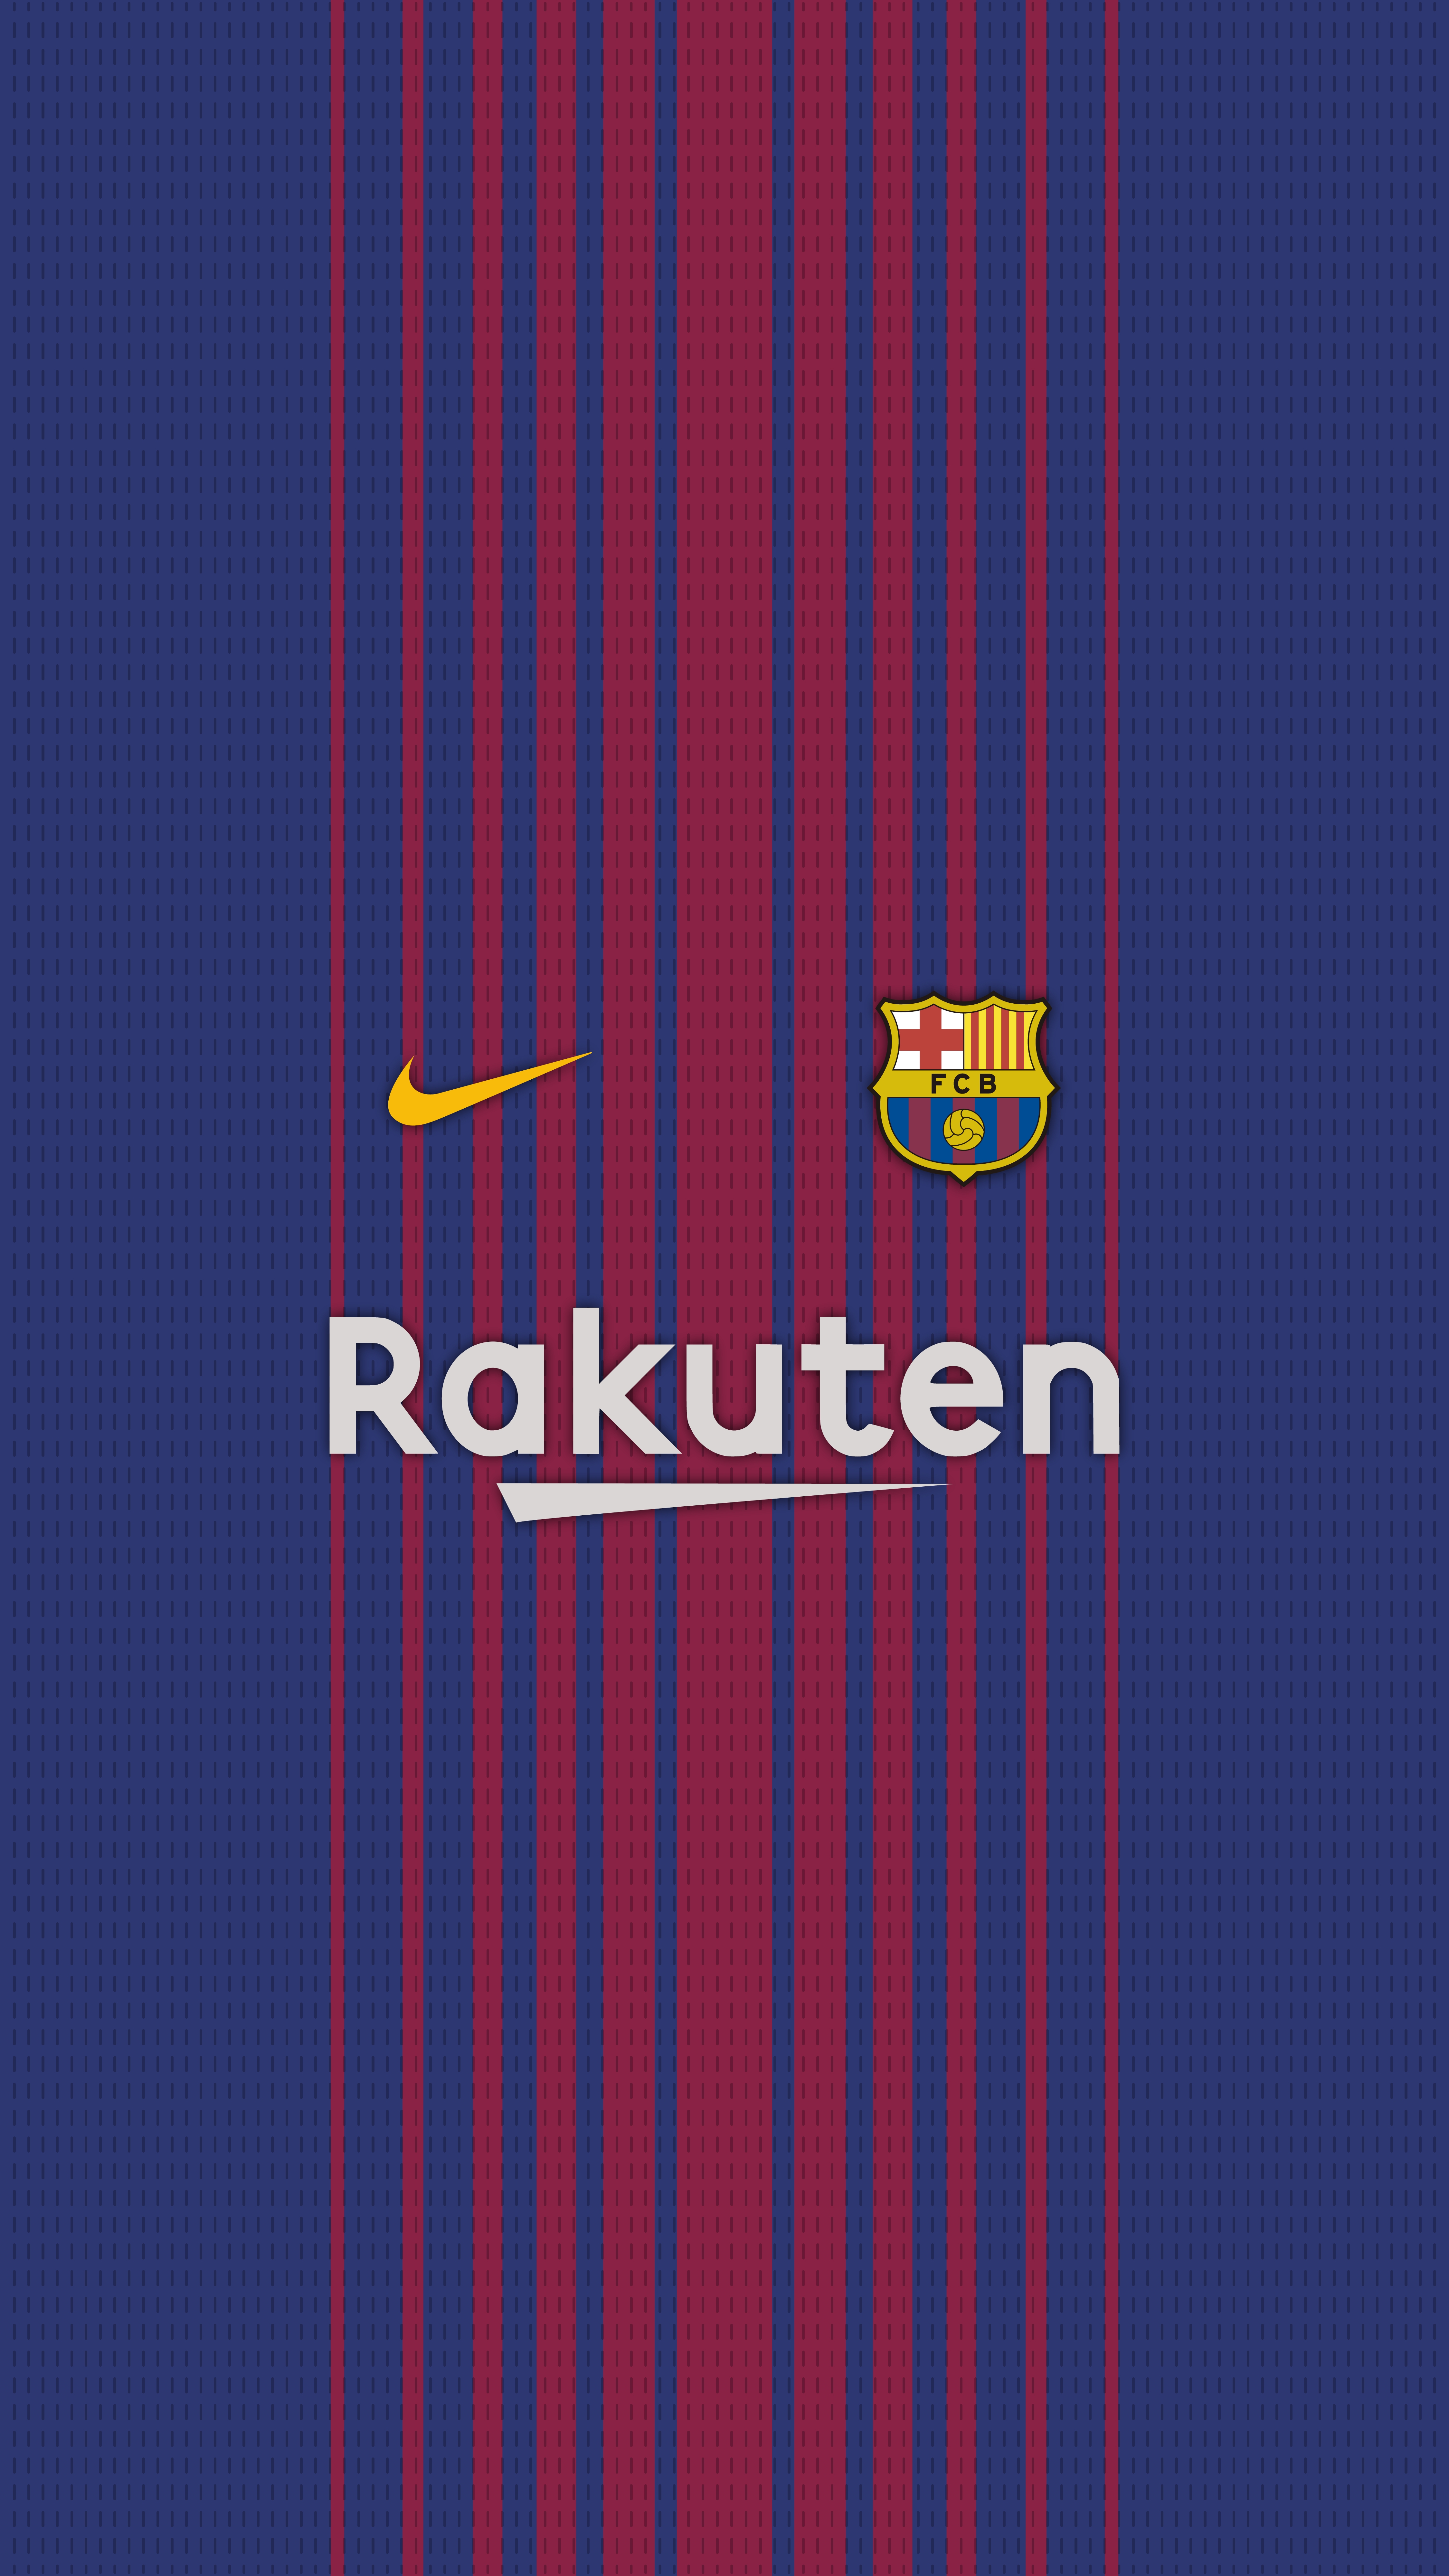 Unique Barcelona New Jersey Wallpaper Great Foofball Club